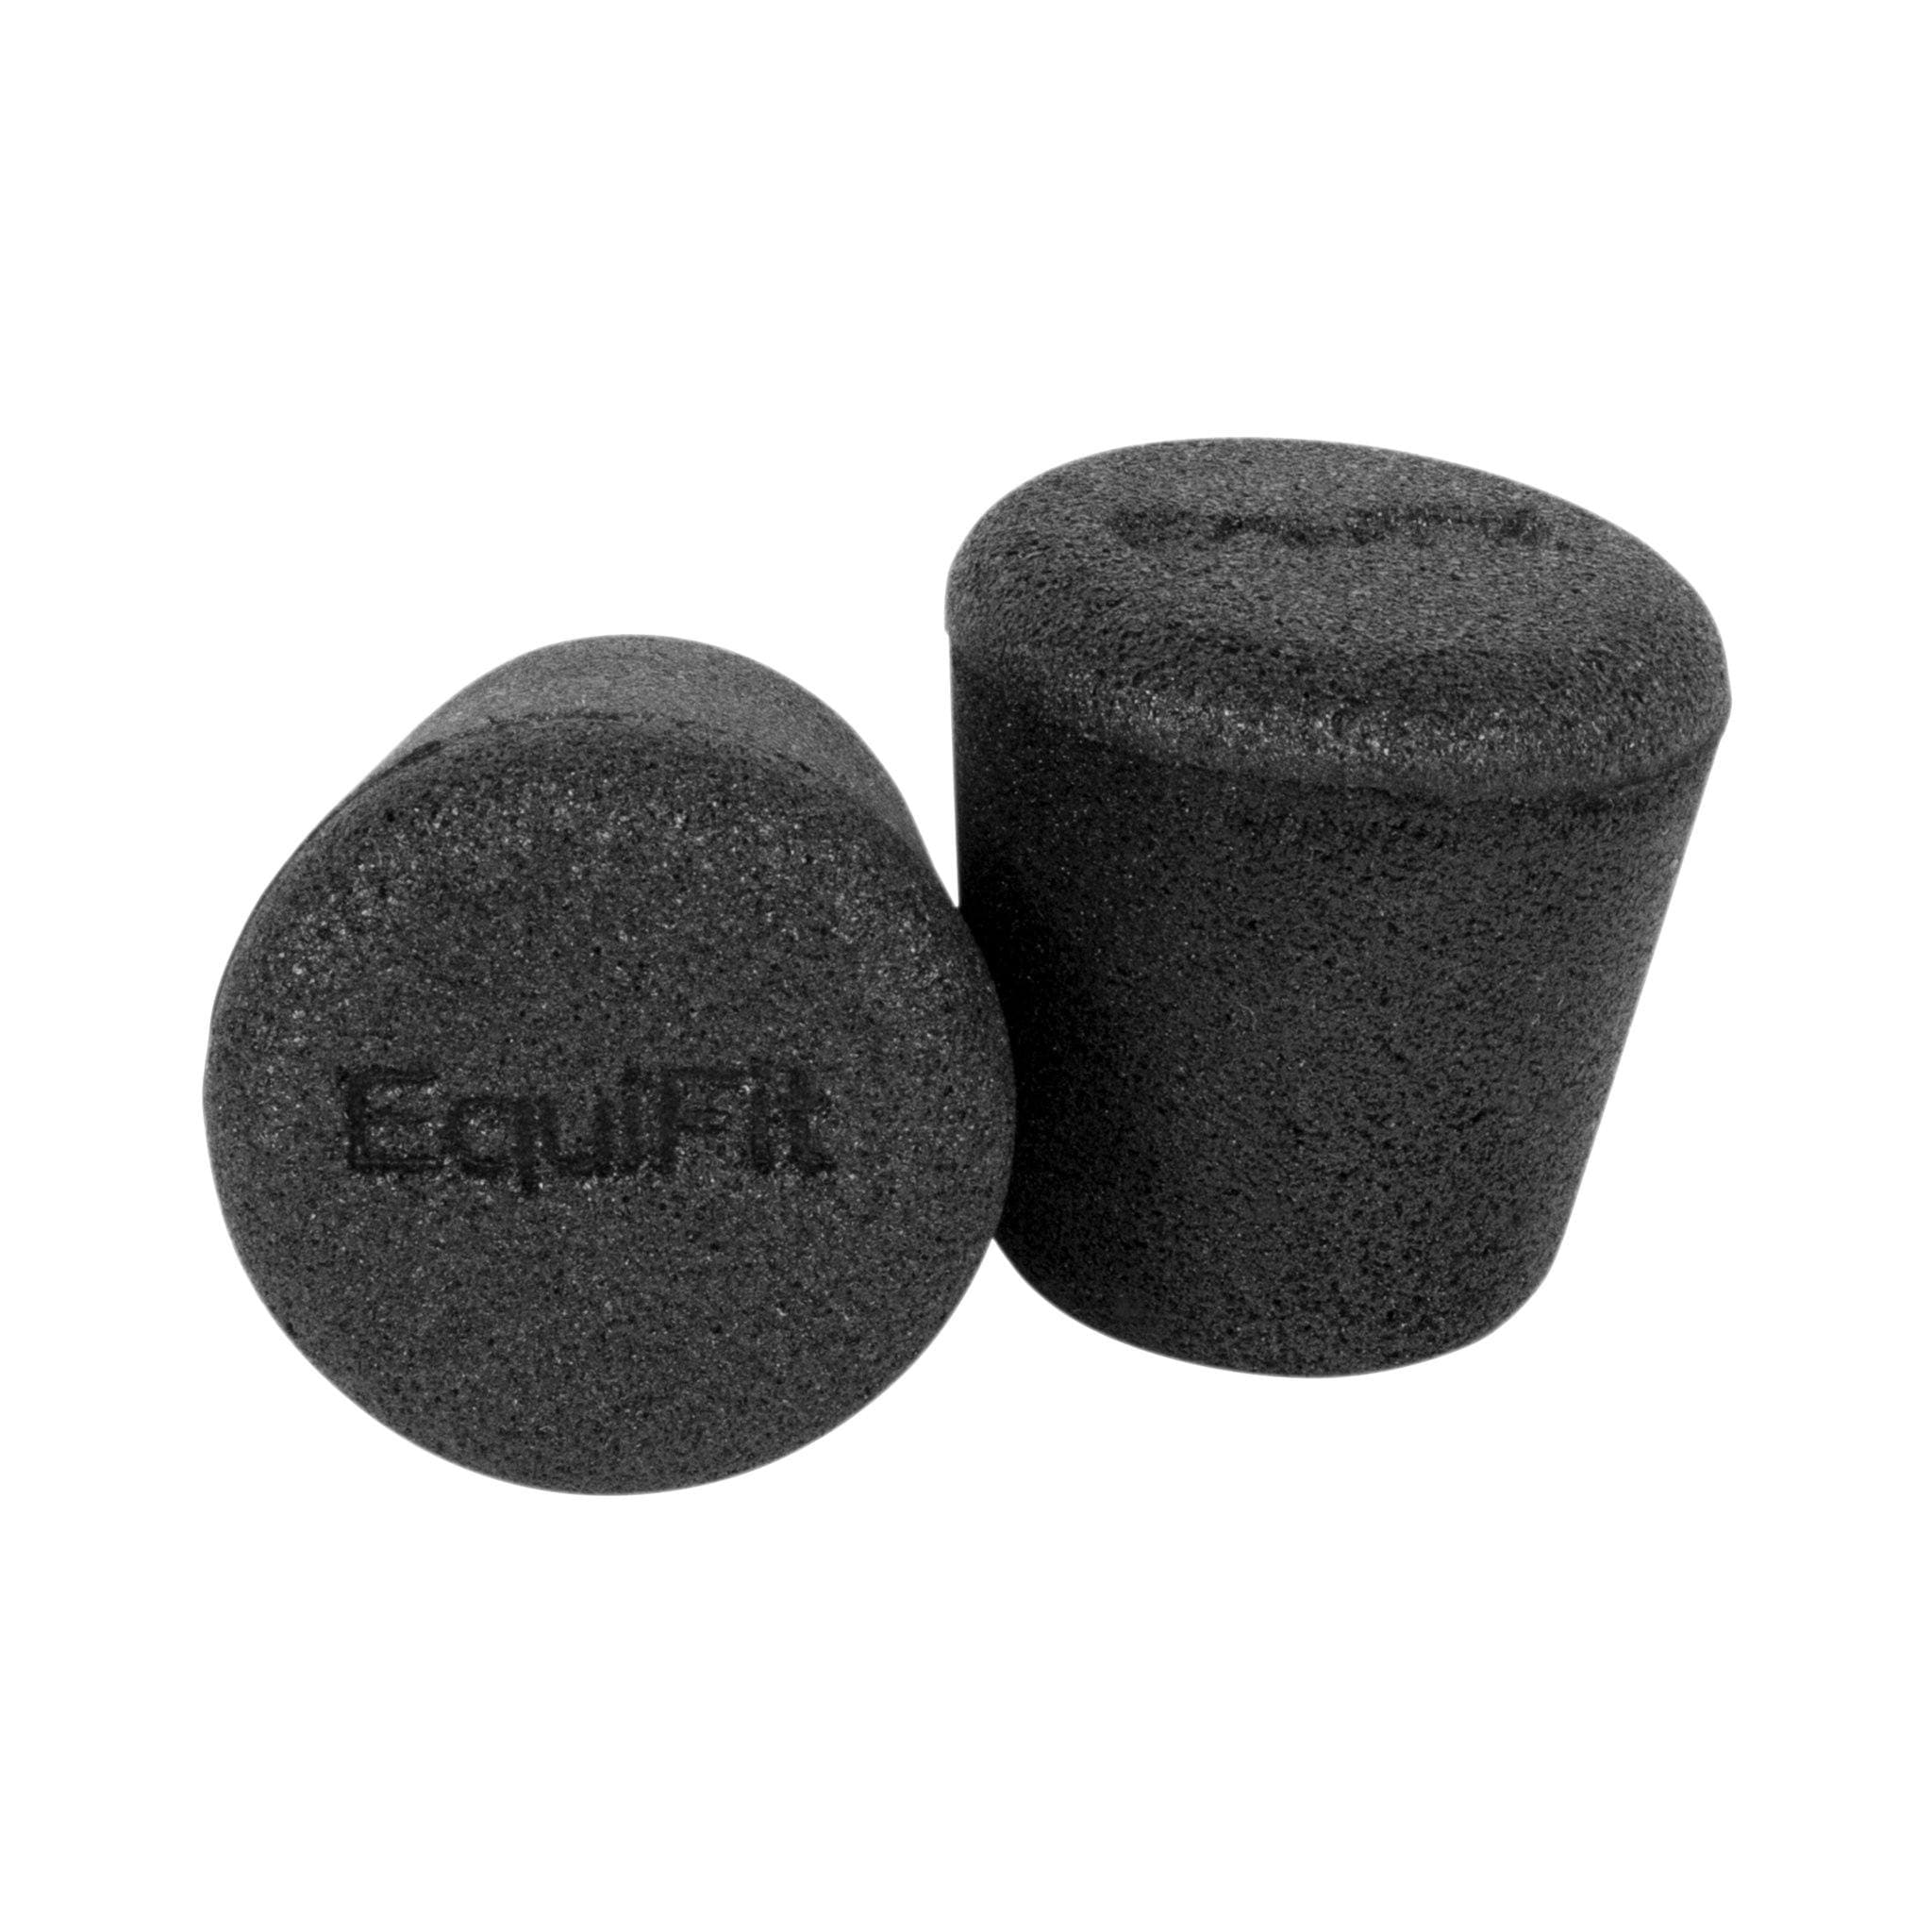 EquiFit SilentFit Ear Plugs - 10 Pairs